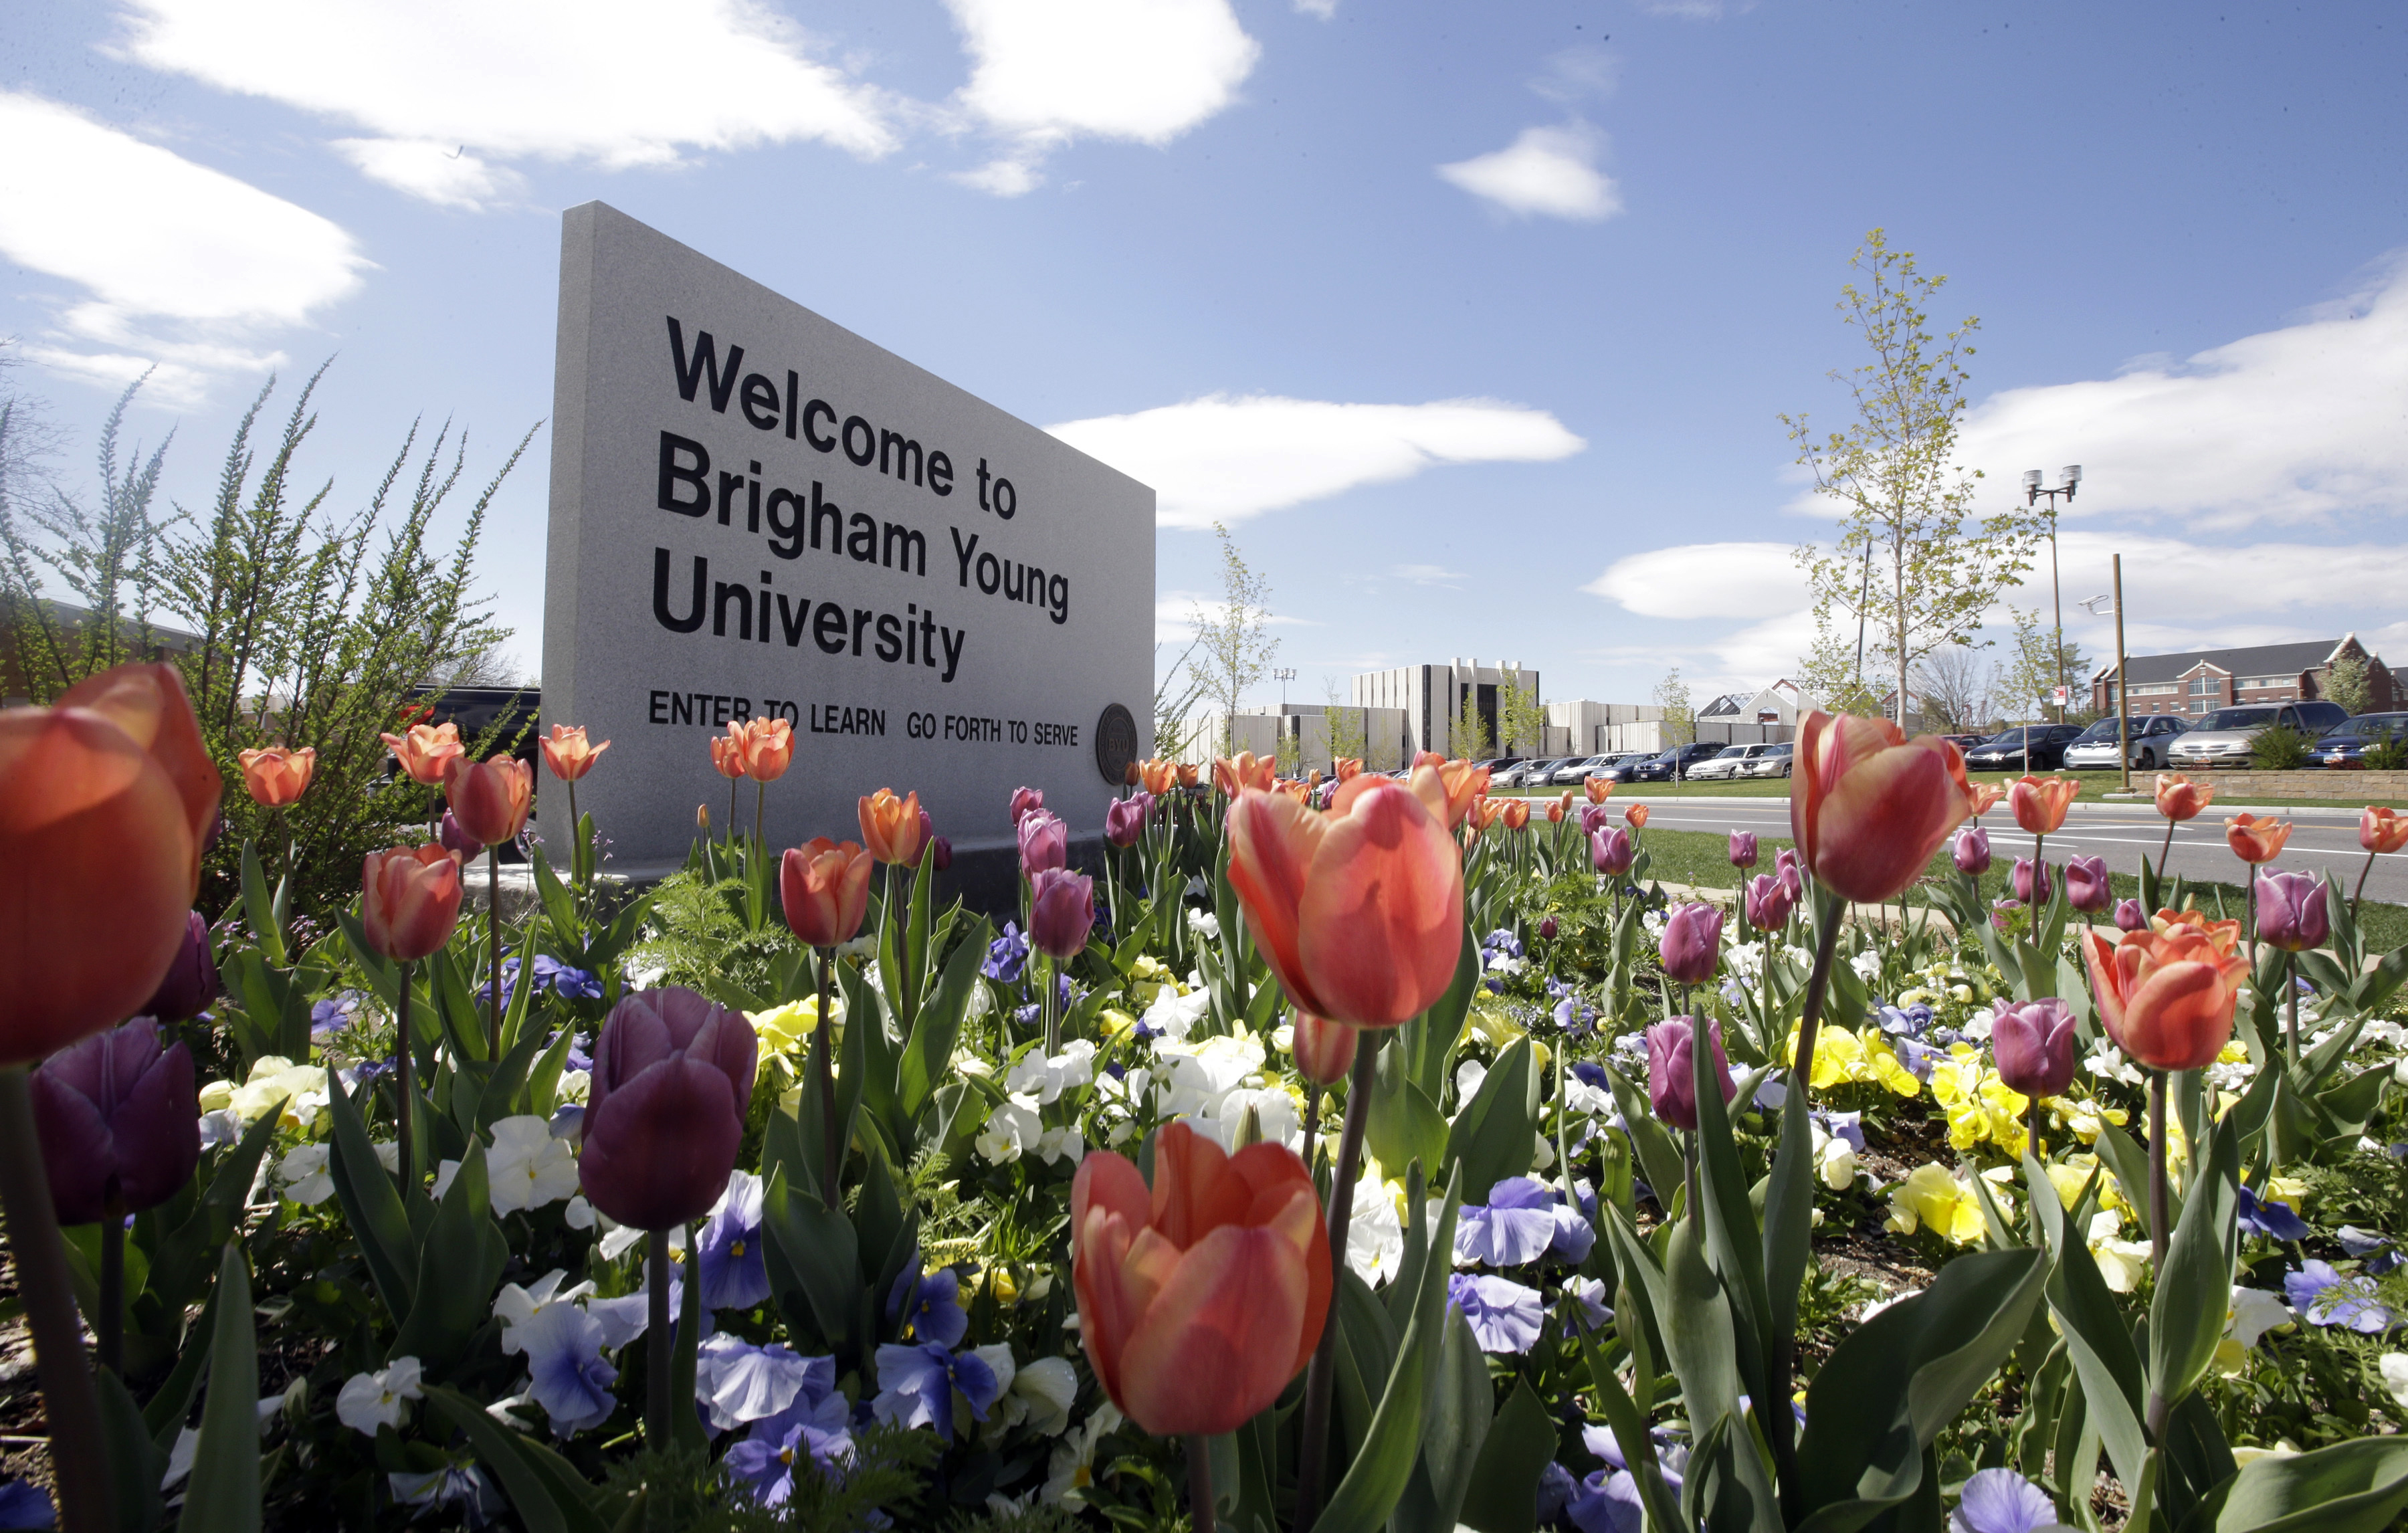 FILE - This April 19, 2016, file photo, shows a welcome sign to Brigham Young University in Provo, Utah. Brigham Young University found out Thursday, Aug. 4, 2016, that federal authorities will investigate the campus process for handling reports of sexual assault. (AP Photo/Rick Bowmer, File)